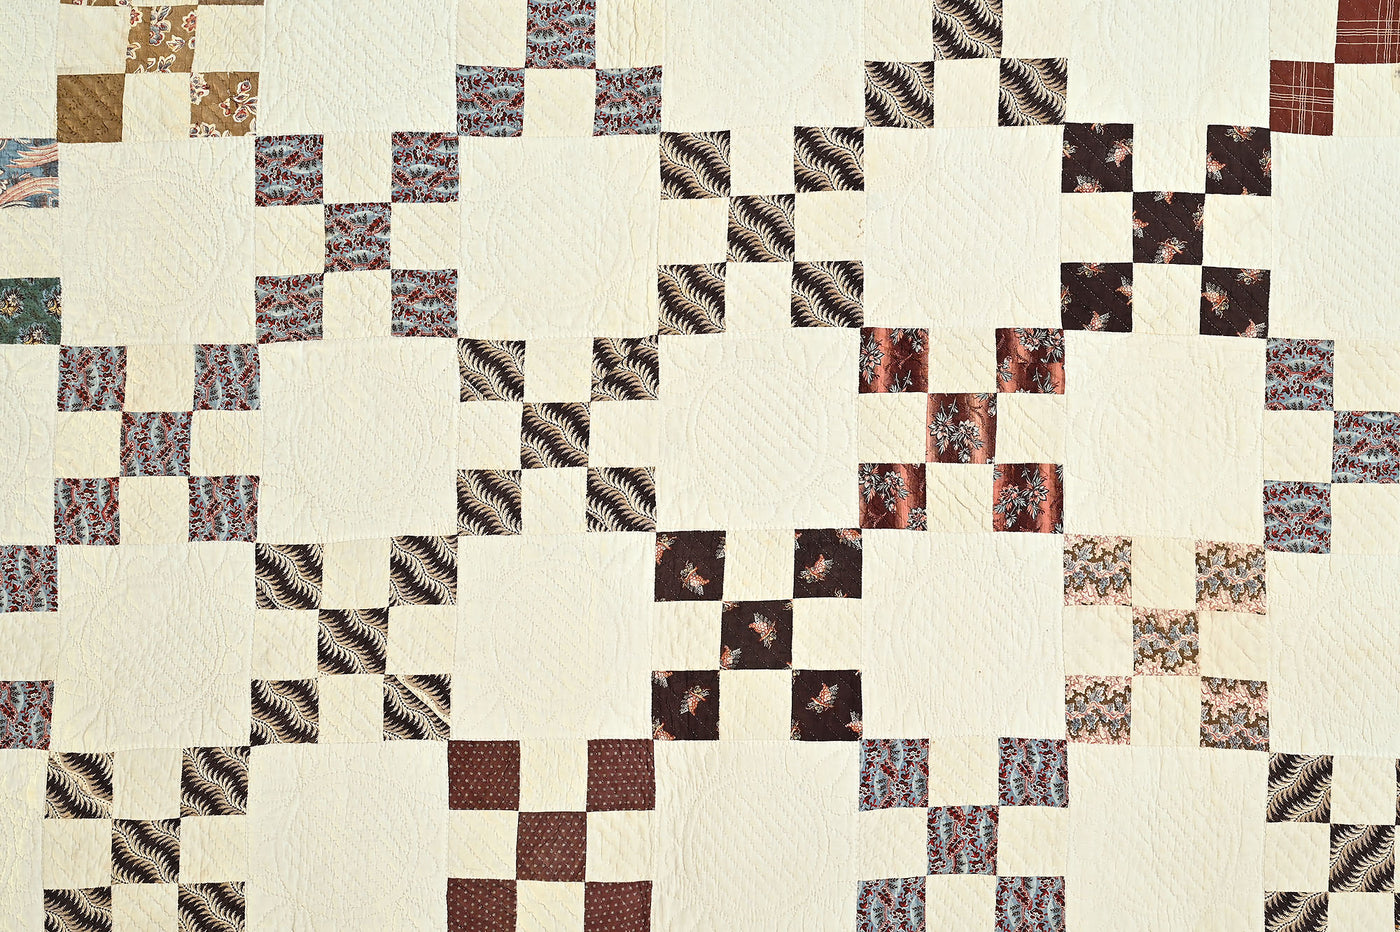 Close up view of Chintz Nine Patch quilt showing small square quilt patches of varying patterns against a cream colored background. 